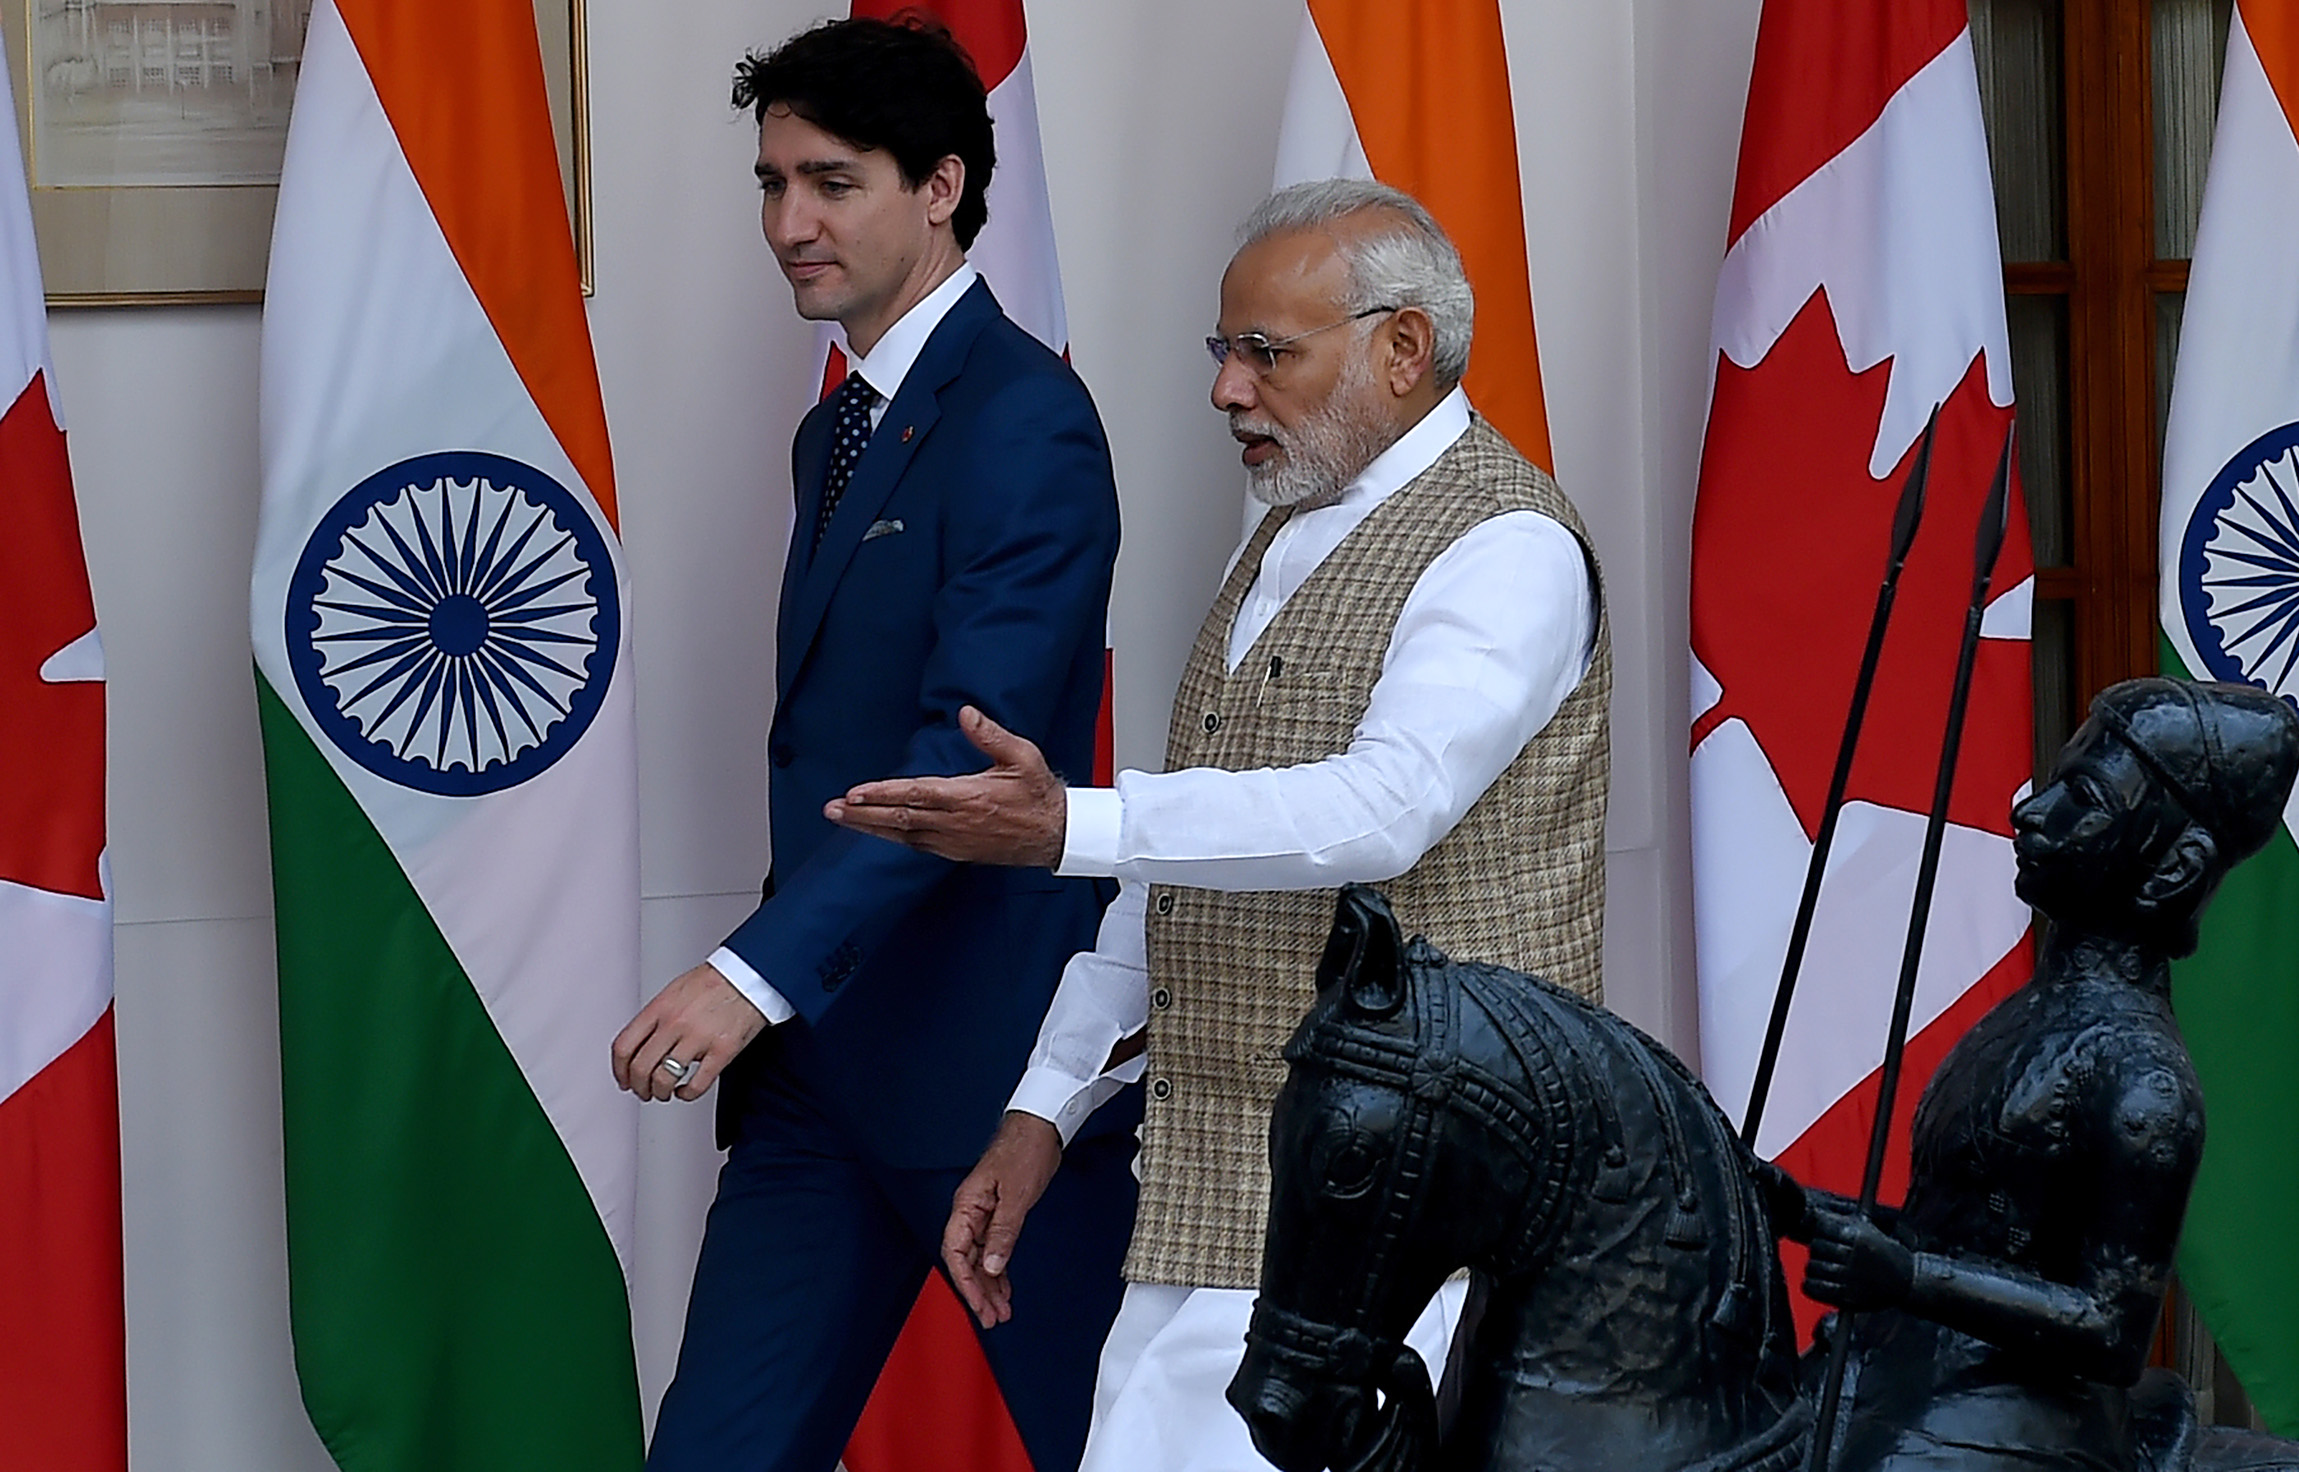 India Slams Trudeau’s ‘Baseless’ Comment in Growing Debacle - Bloomberg